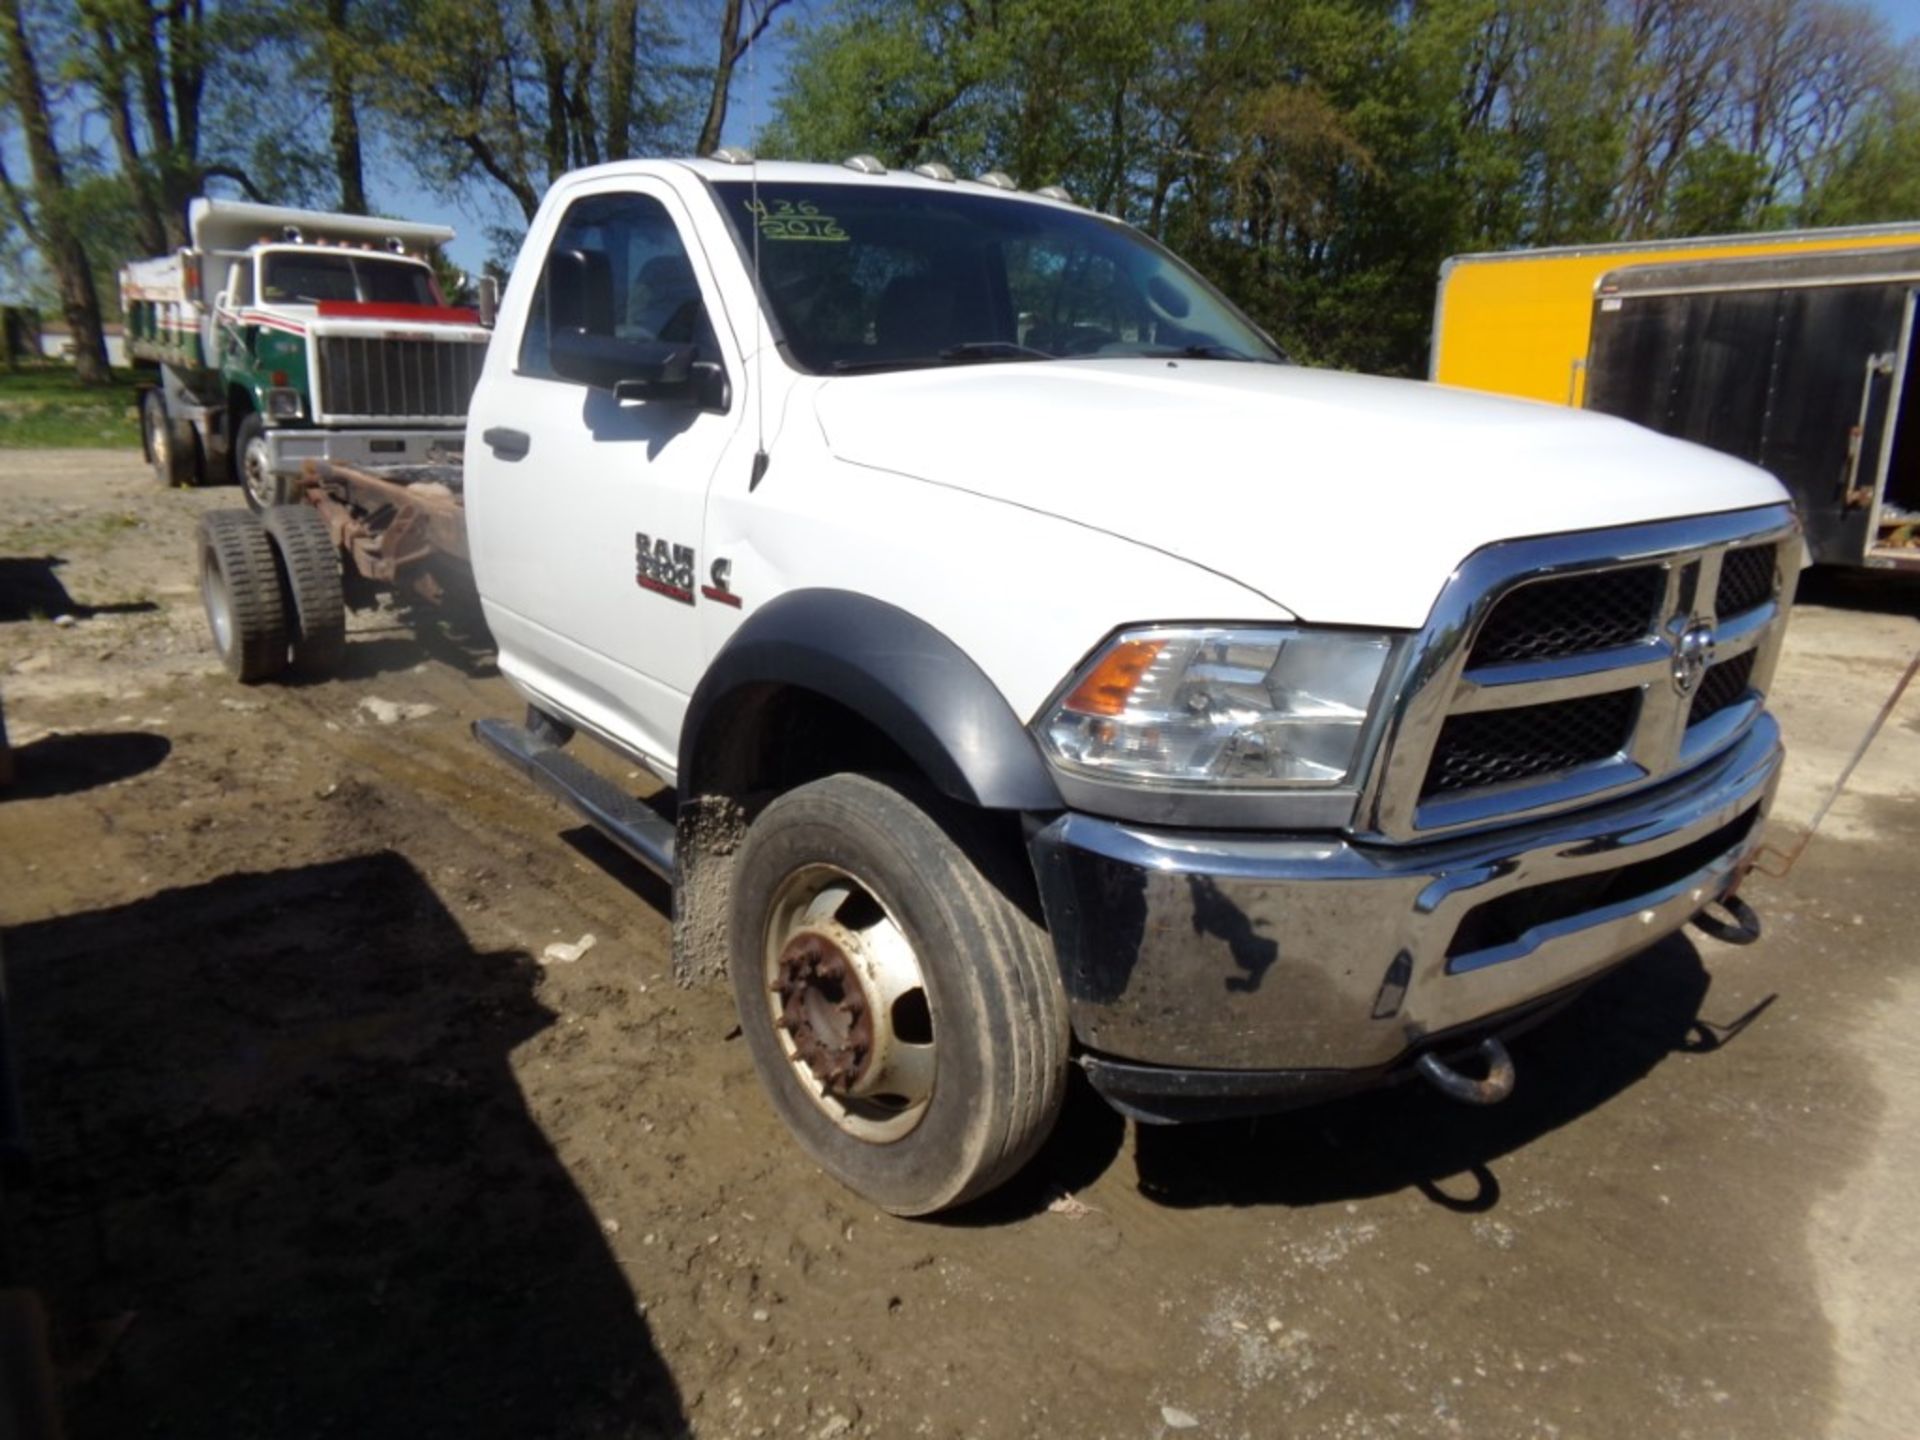 2016 Ram 5500 Heavy Duty Cummins Diesel Cab and Chassis, Reg. Cab, Auto, 2 WD, Auto Trans, 173,961 - Image 4 of 5